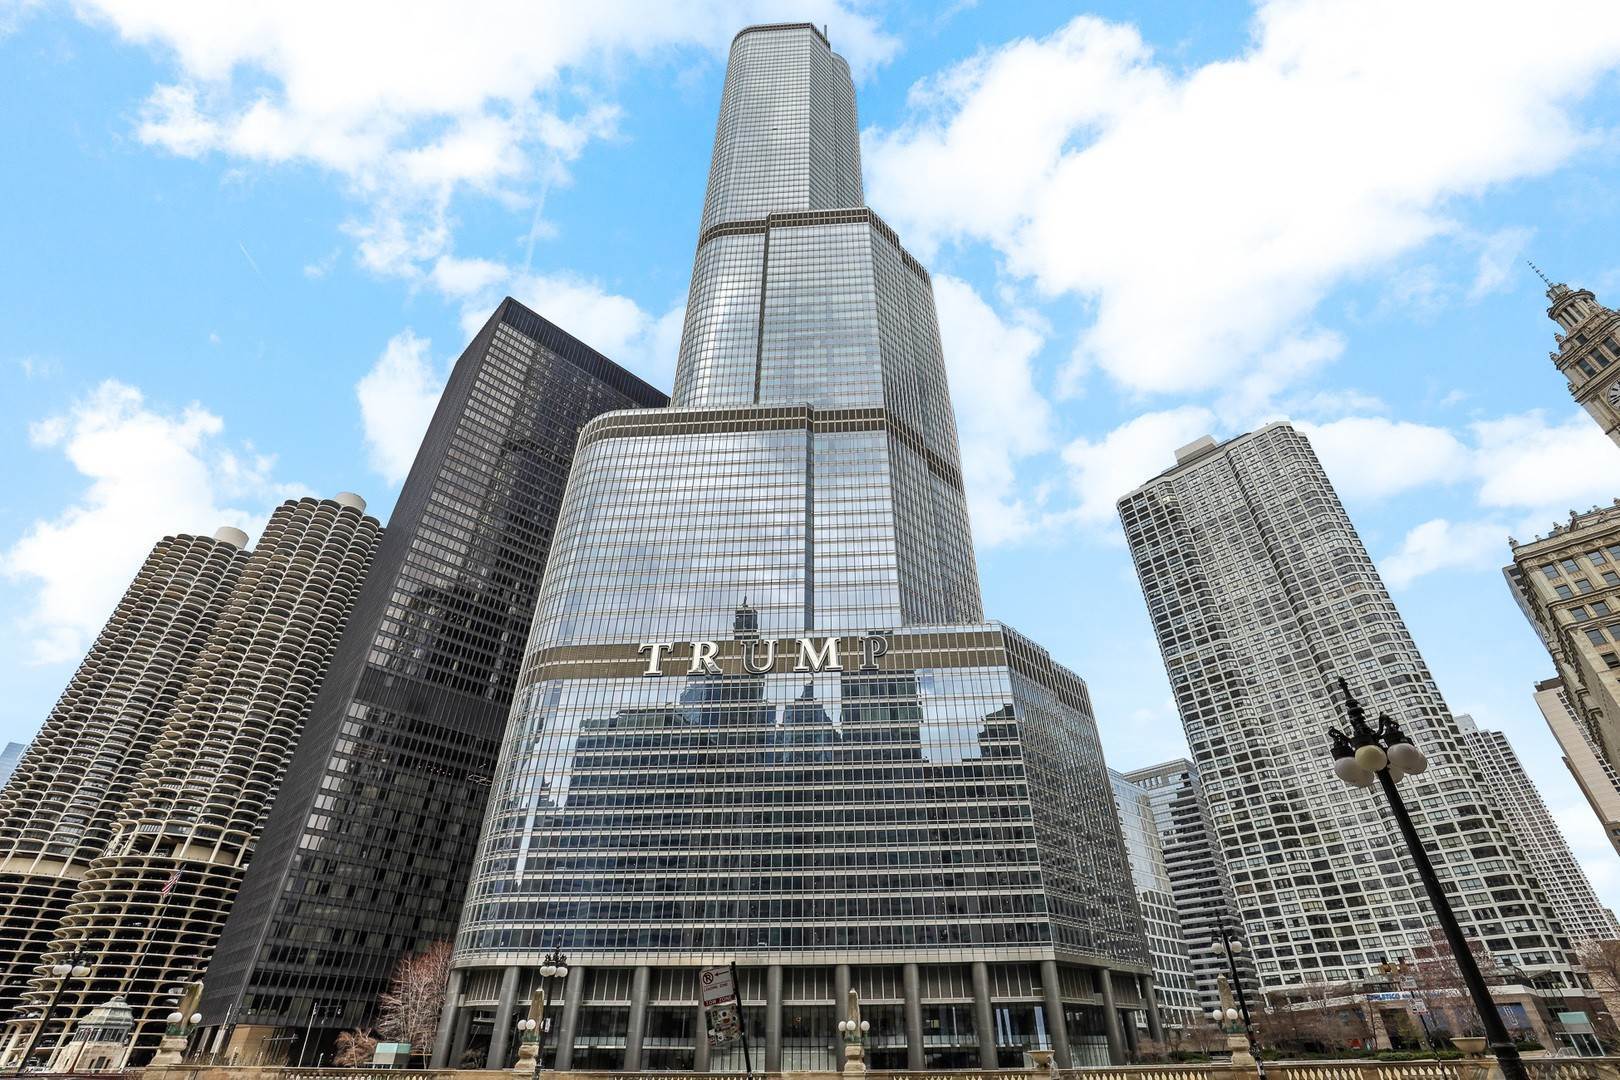 Single Family for Sale at River North, Chicago, IL 60611